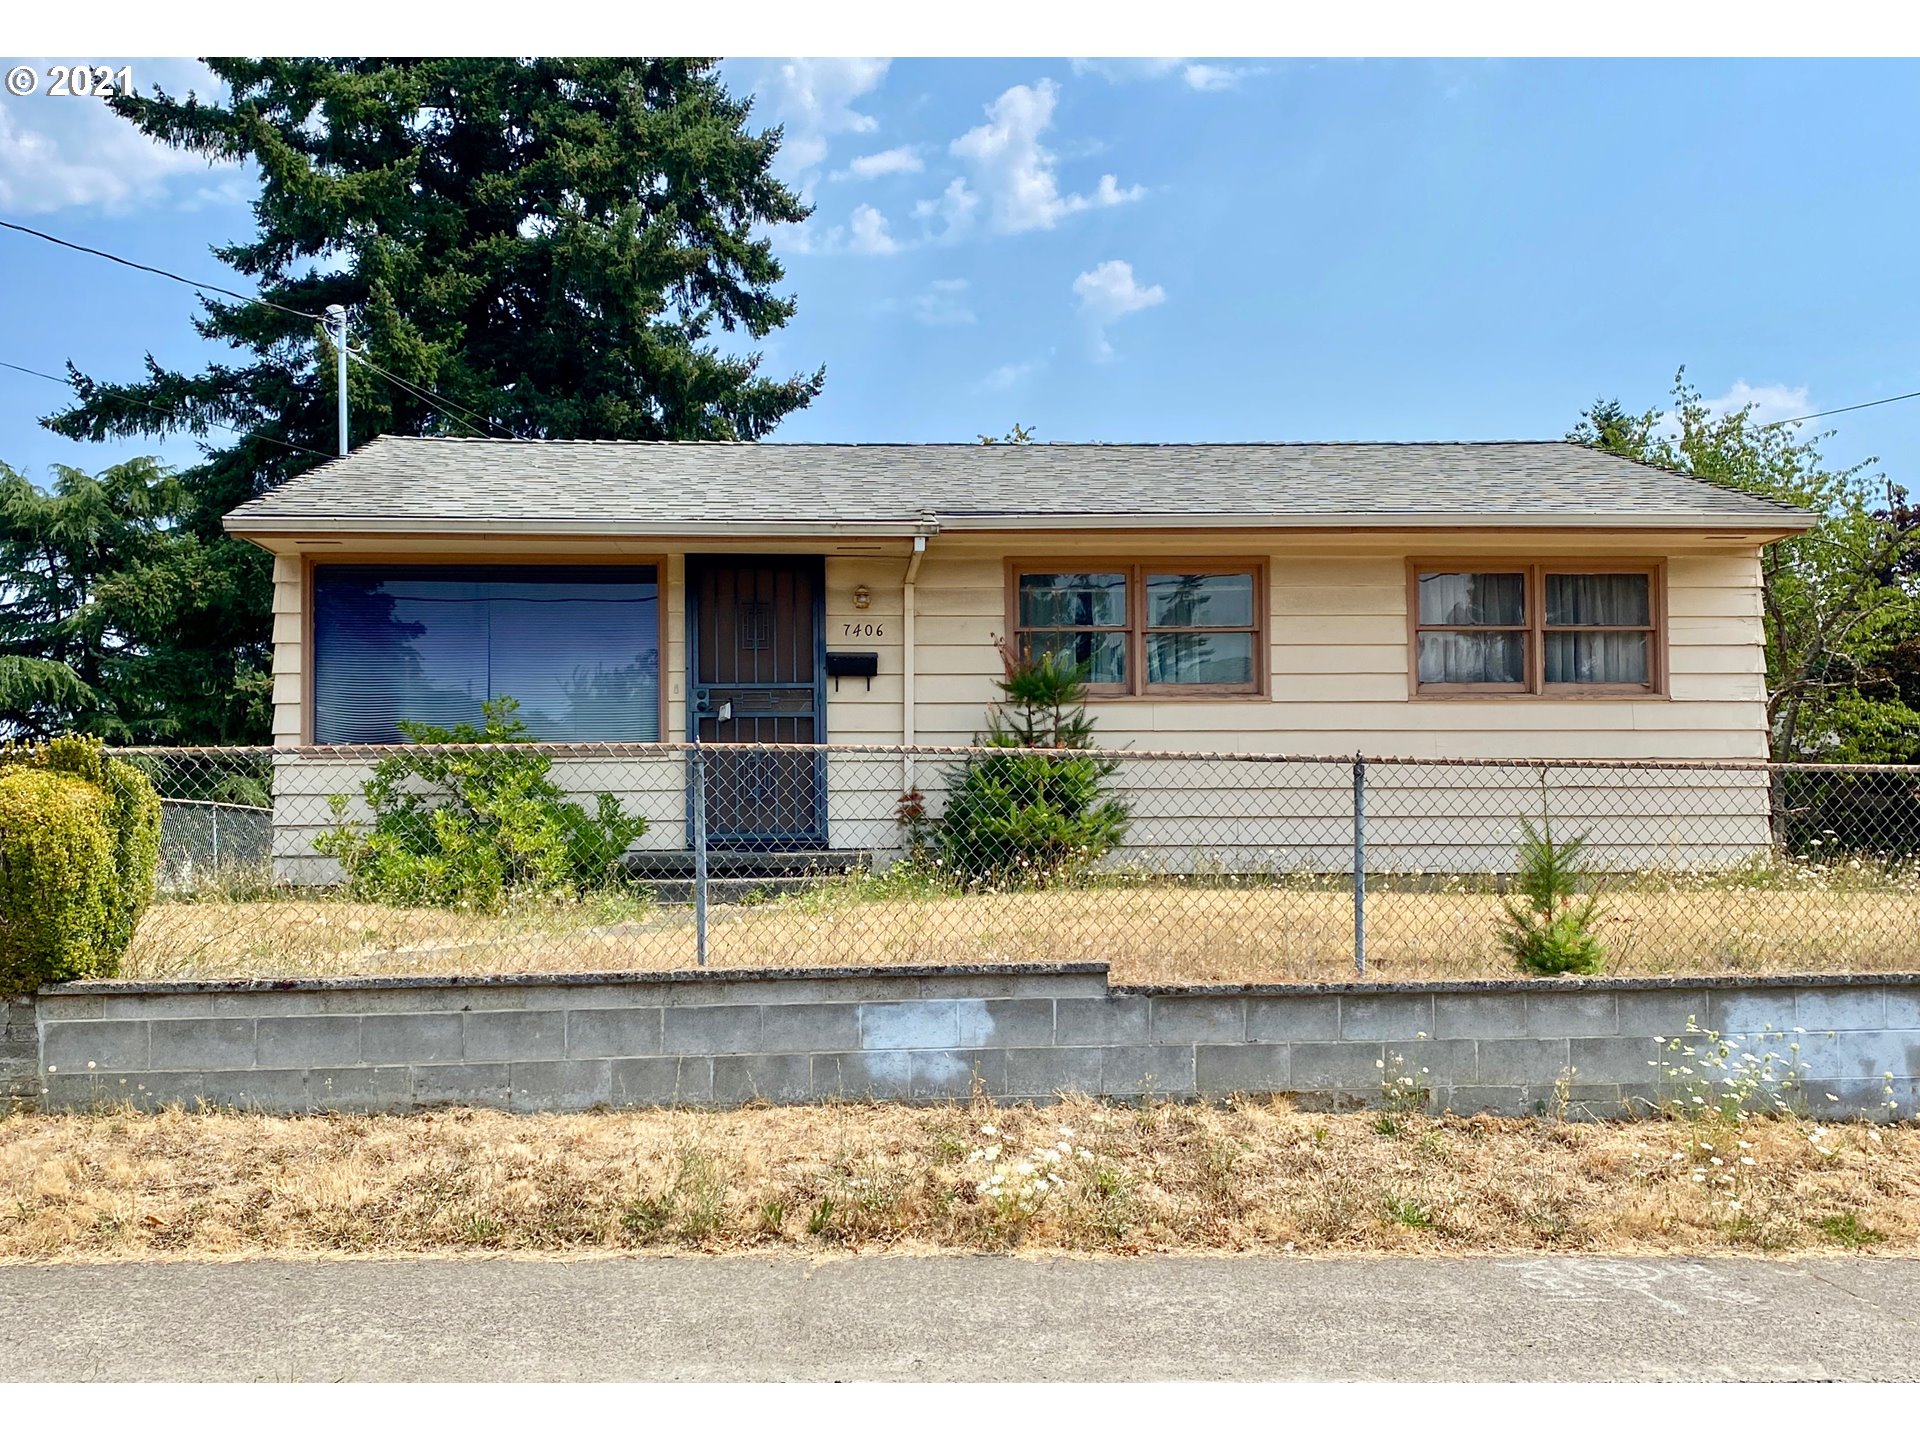 7406 SE 87TH AVE (1 of 22)